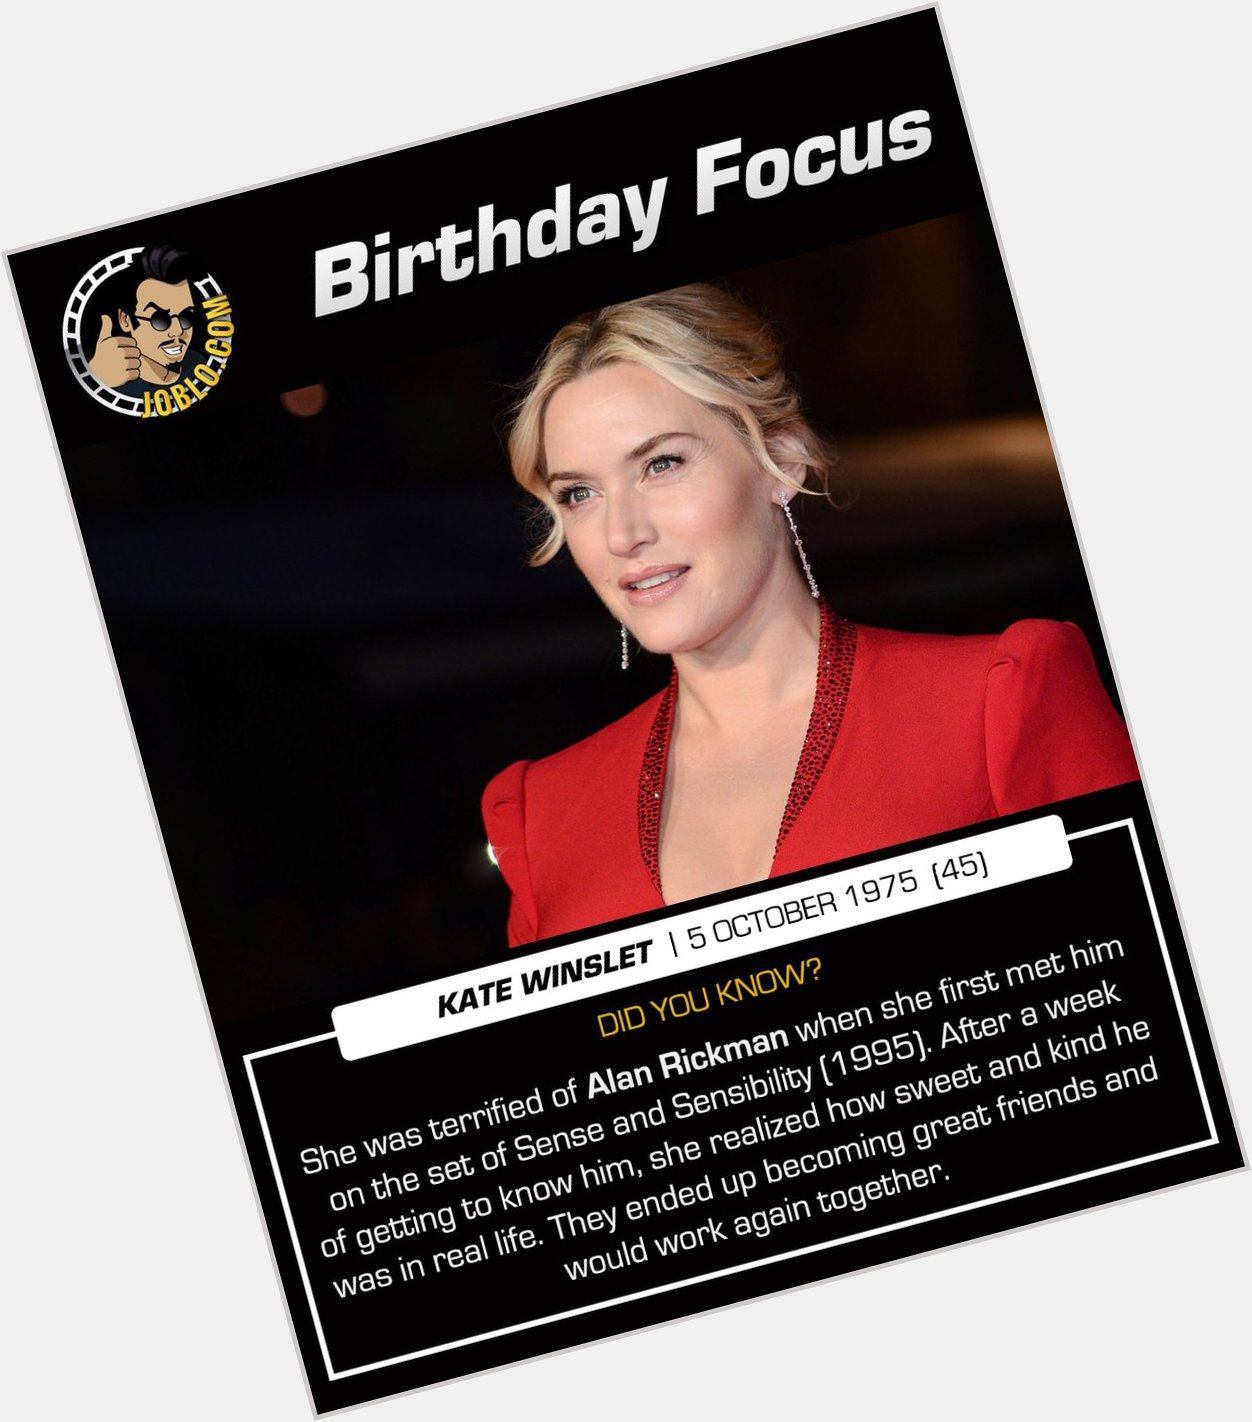 Happy 45th birthday to the amazing, Kate Winslet!

What do you think is her best role? 